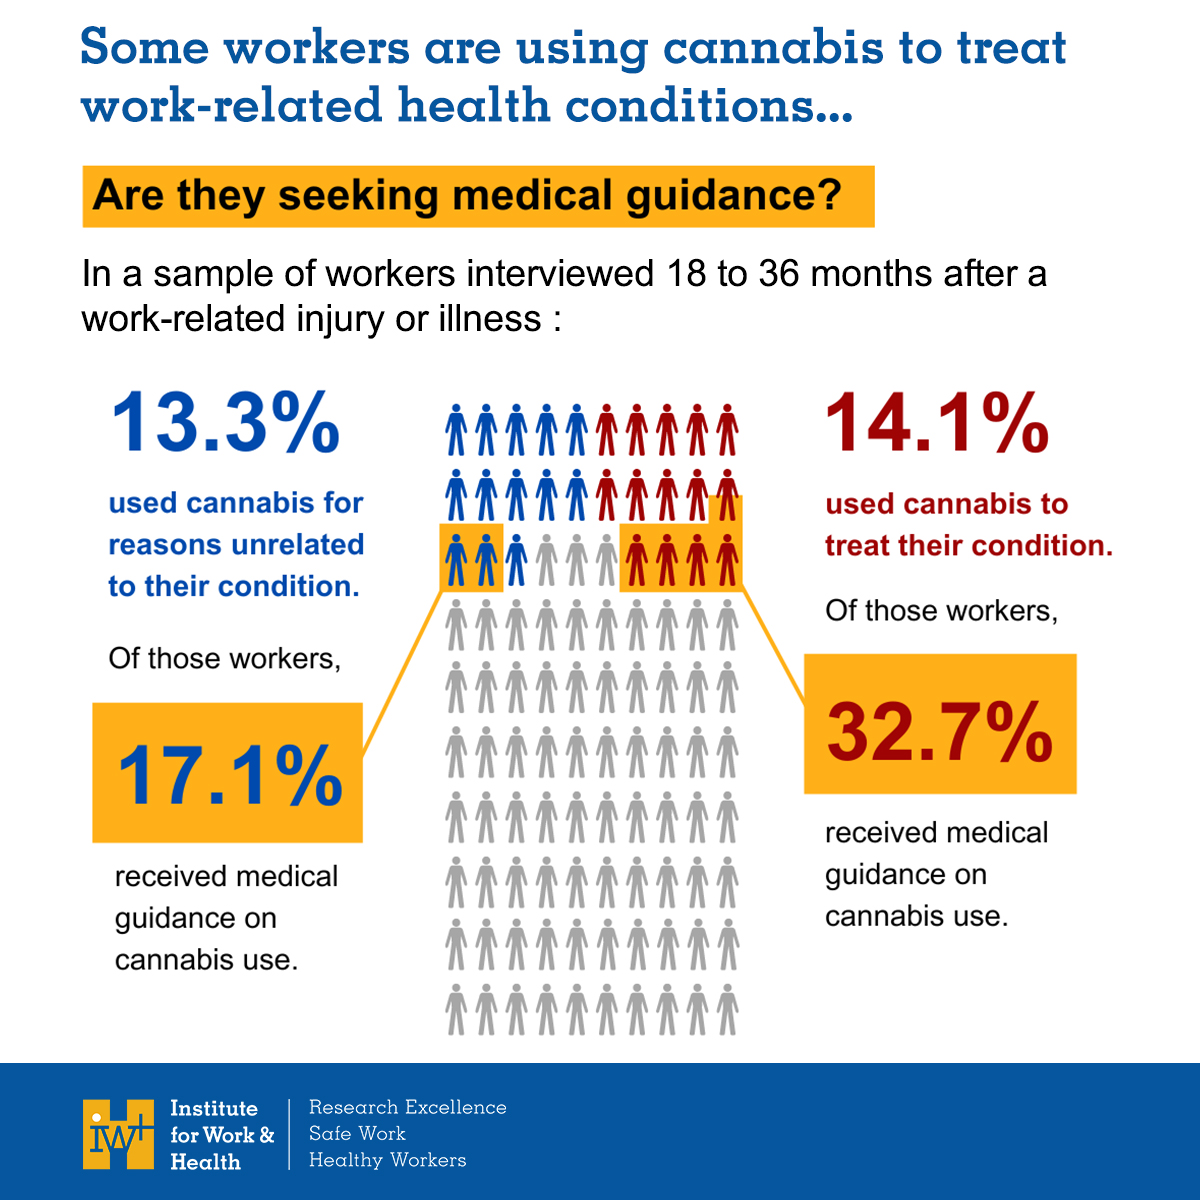 When interviewed 18-36 months after a physical work-related injury or illness for an IWH study, 1 in 7 Ontario workers said they used cannabis to treat the condition. Most had not received medical guidance on the therapeutic use of cannabis. Read more: iwh.on.ca/plain-language…